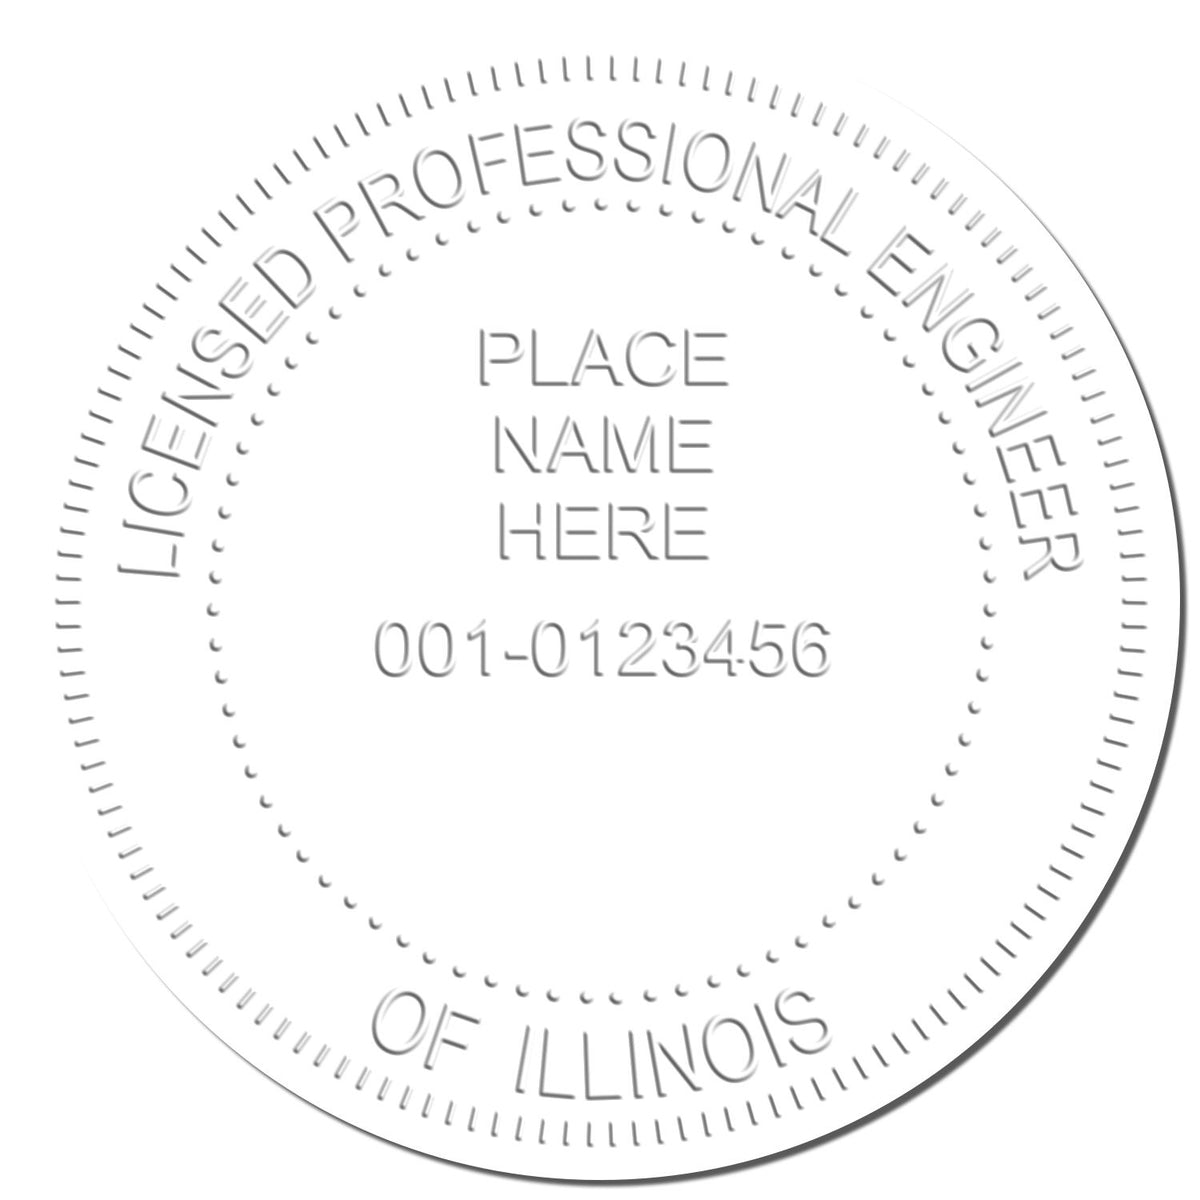 Another Example of a stamped impression of the Illinois Engineer Desk Seal on a piece of office paper.